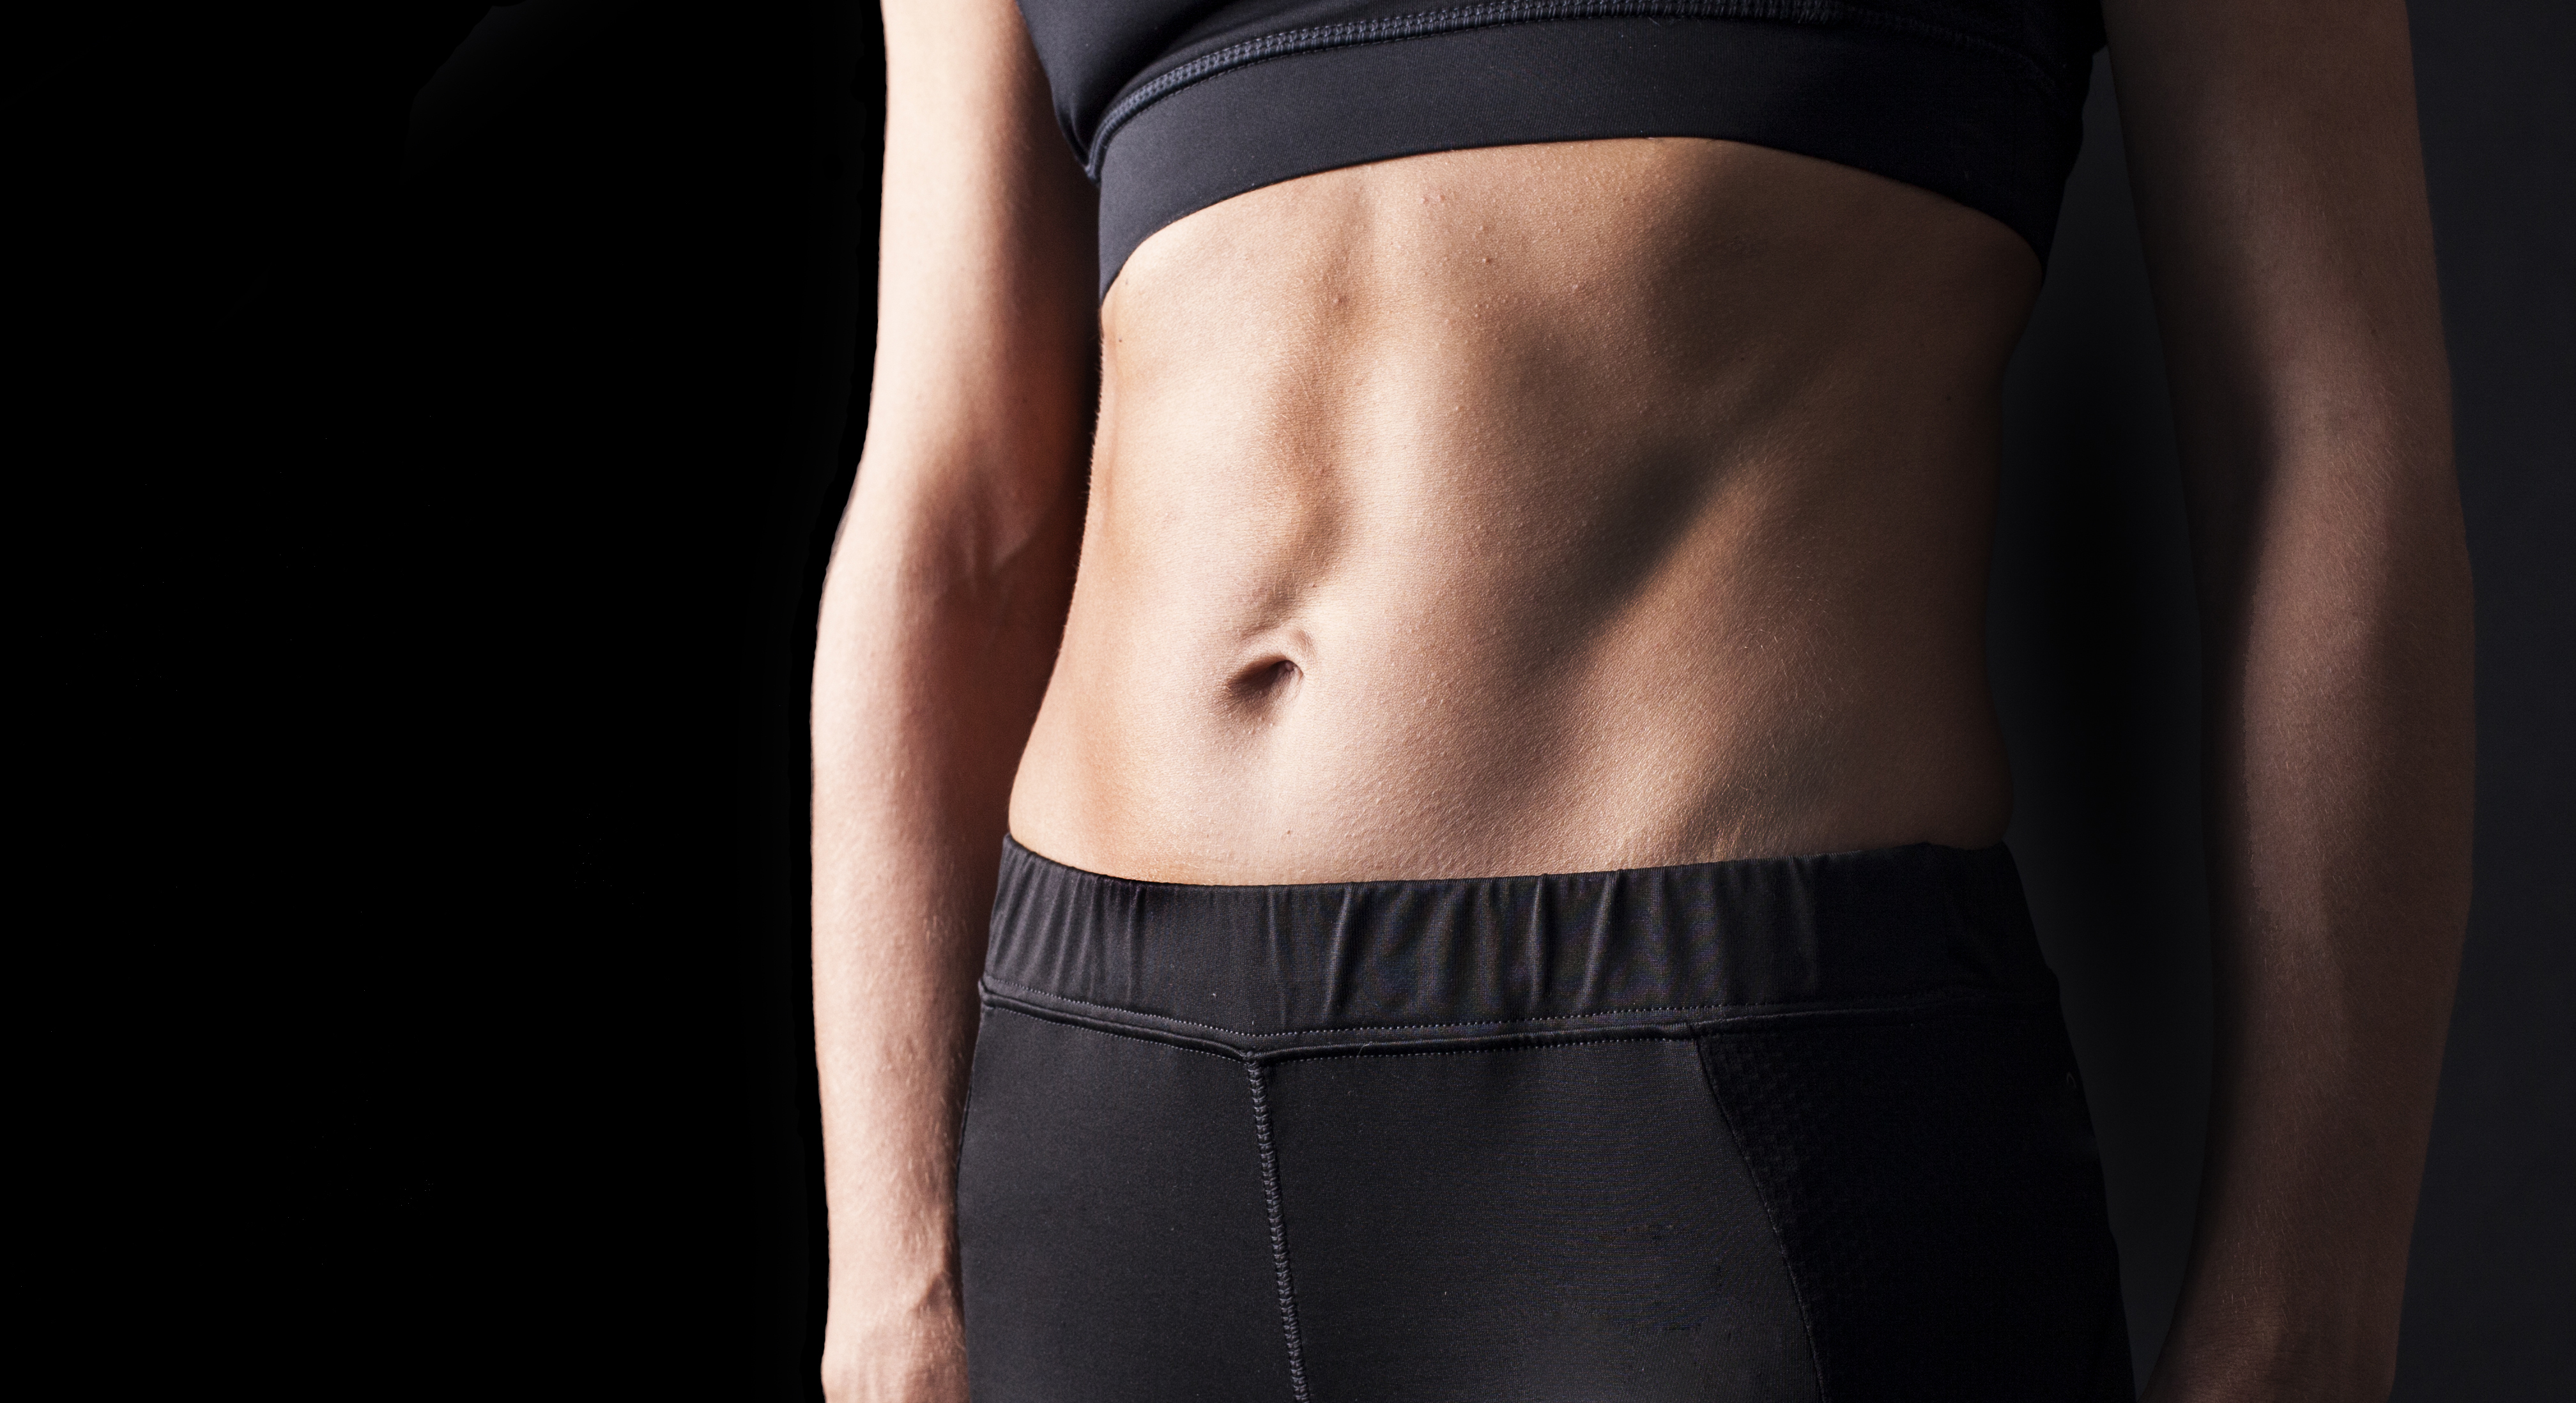 Mini or Full, Which Tummy Tuck is Right for You? - The Plastic